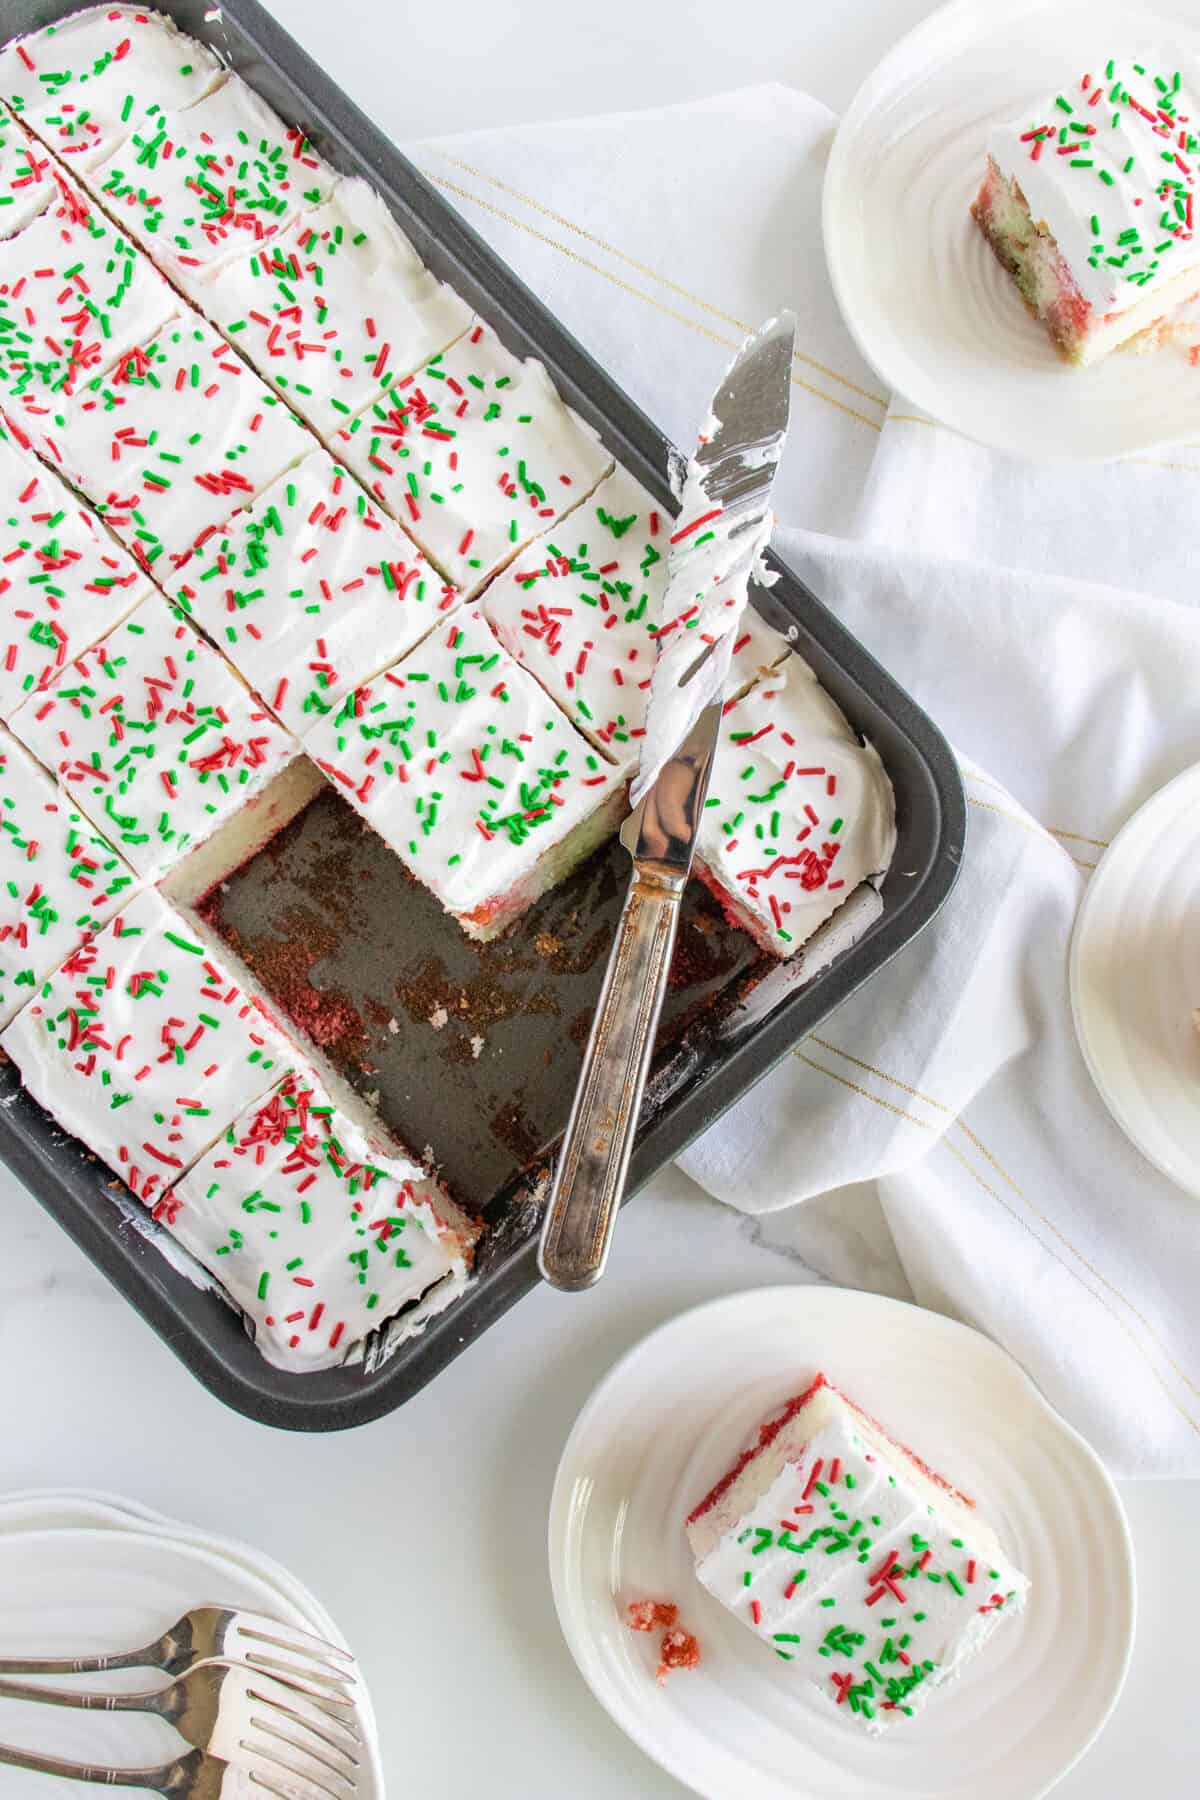 Jello cake frosted with red and green sprinkles 